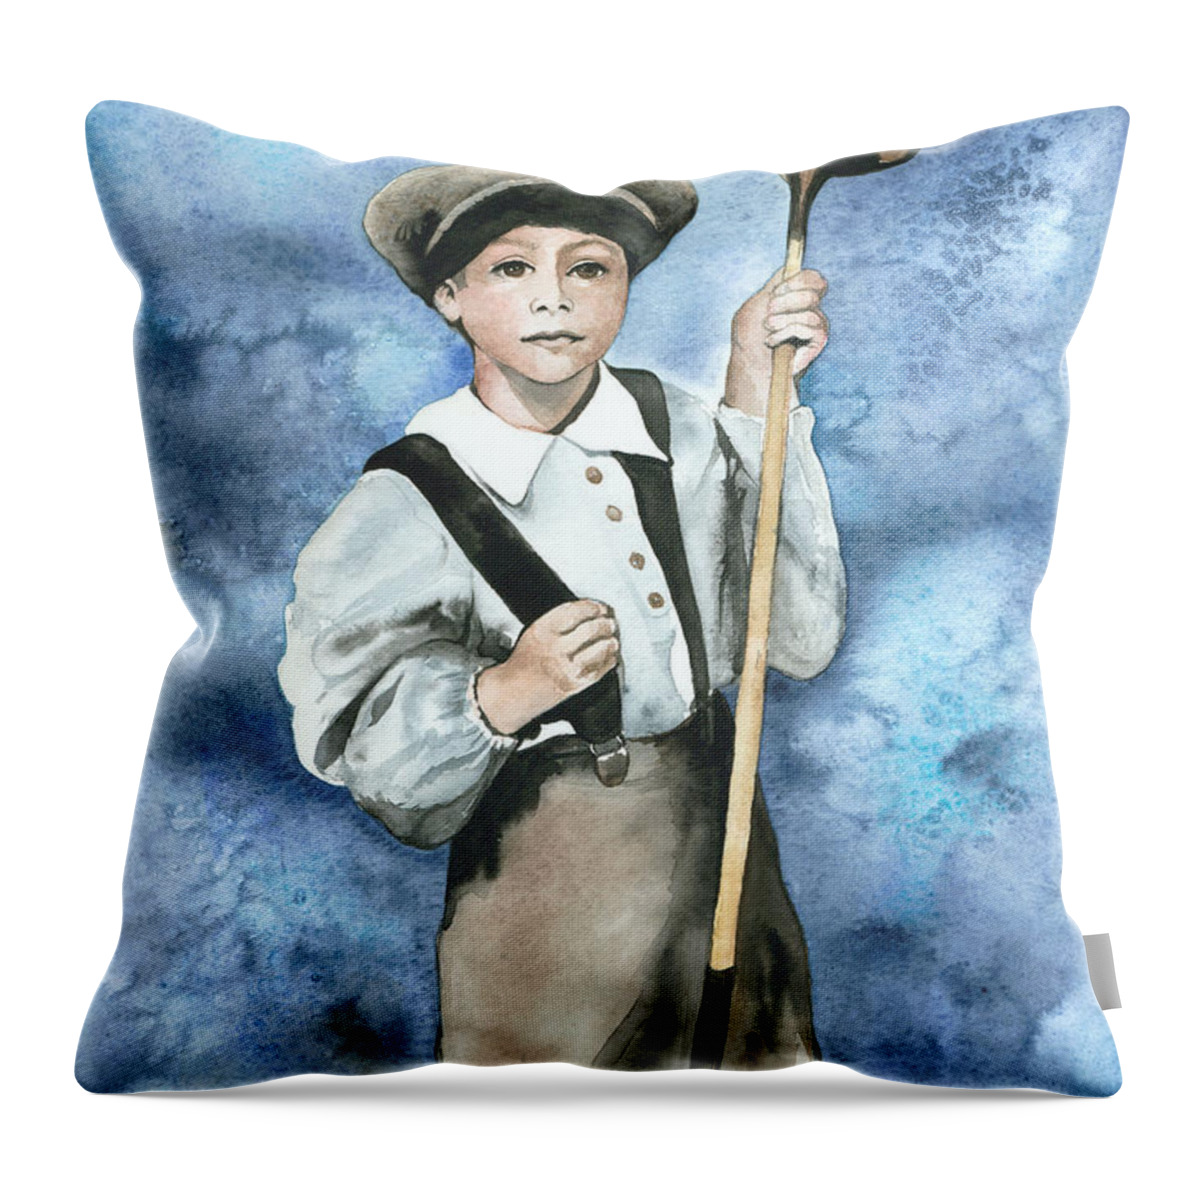 Golfing Throw Pillow featuring the painting Little Caddy by Kim Whitton